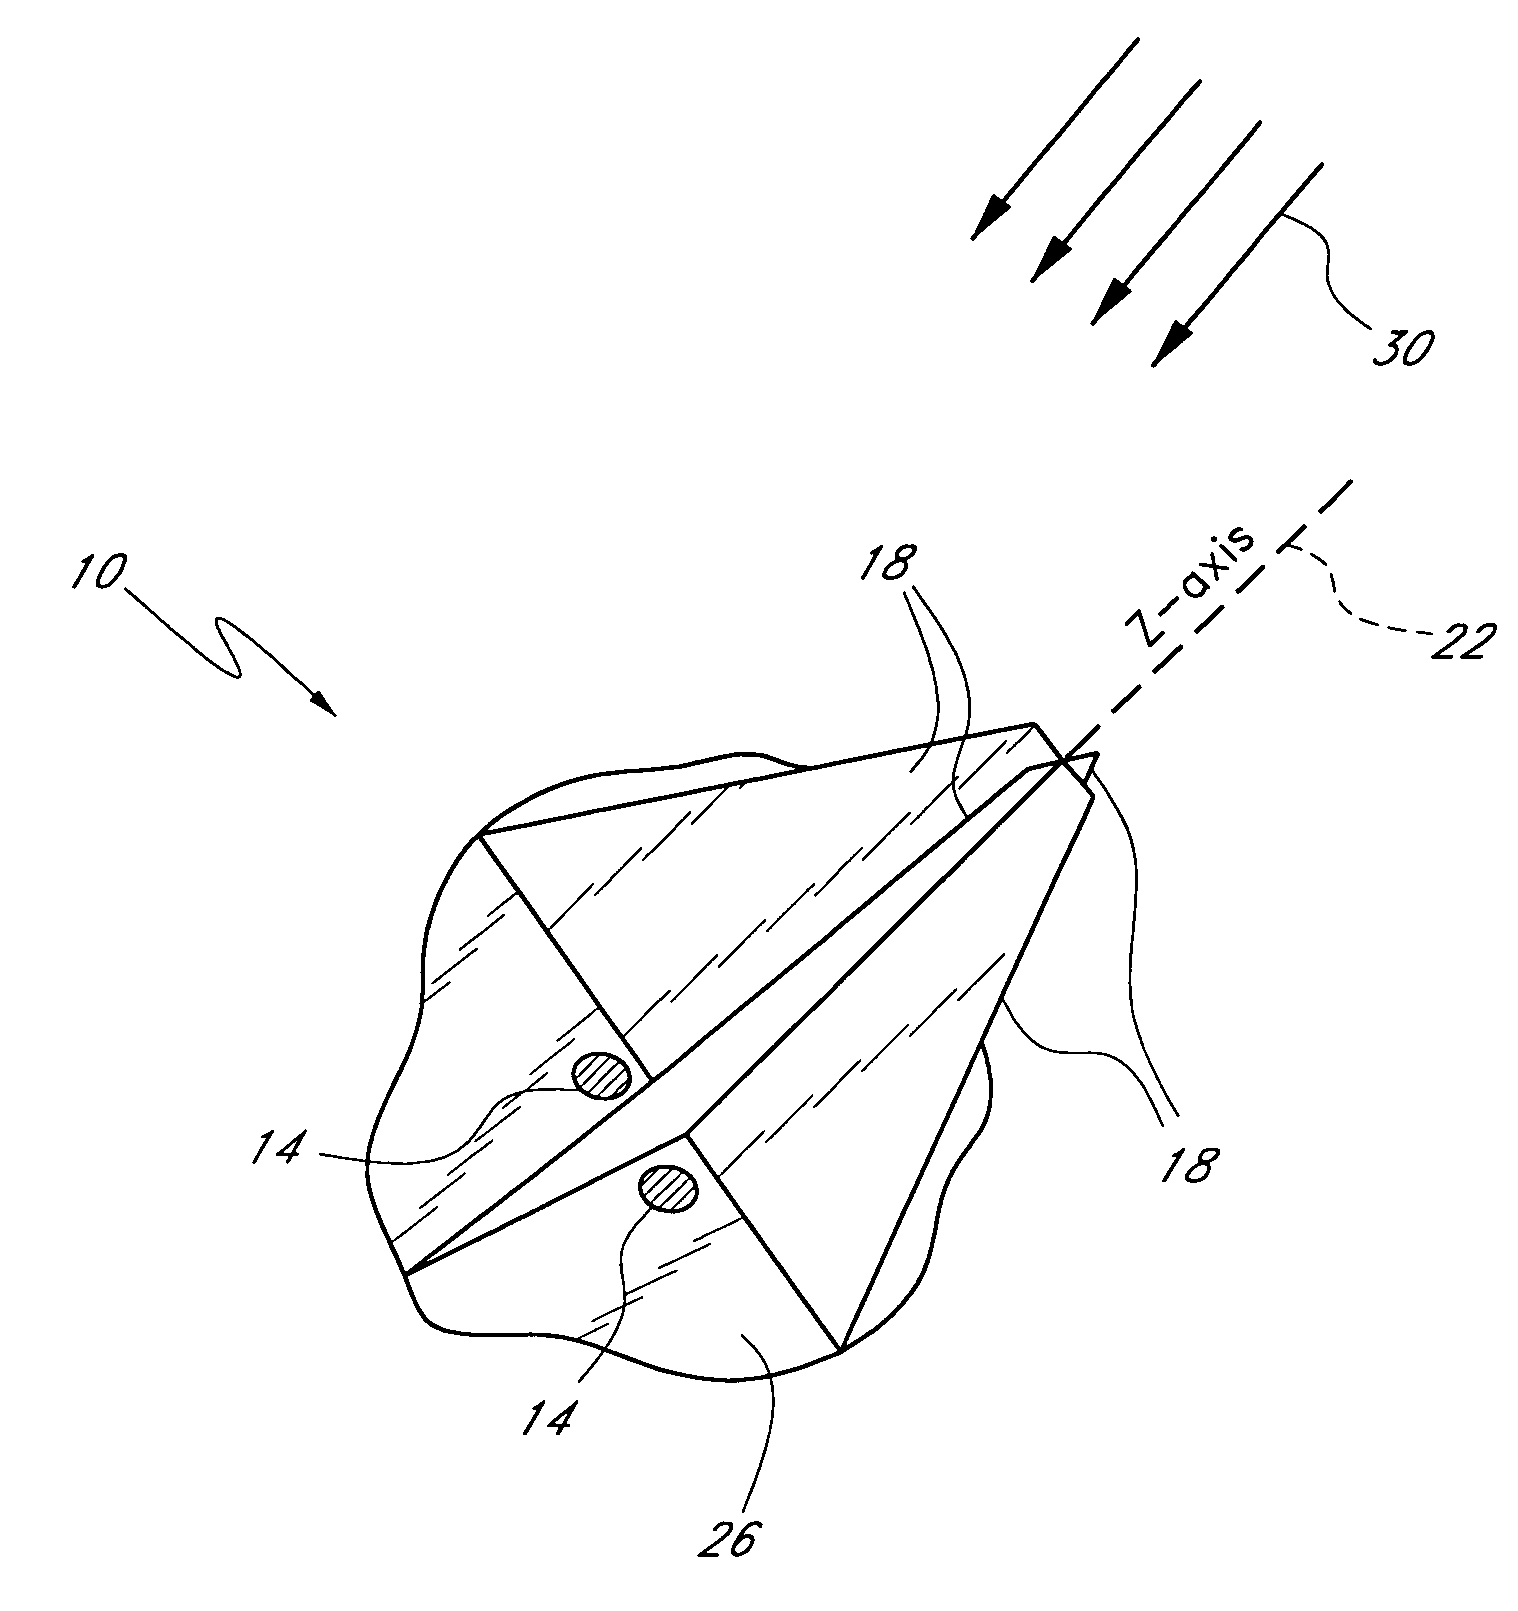 Apparatus and methods to locate and track the sun